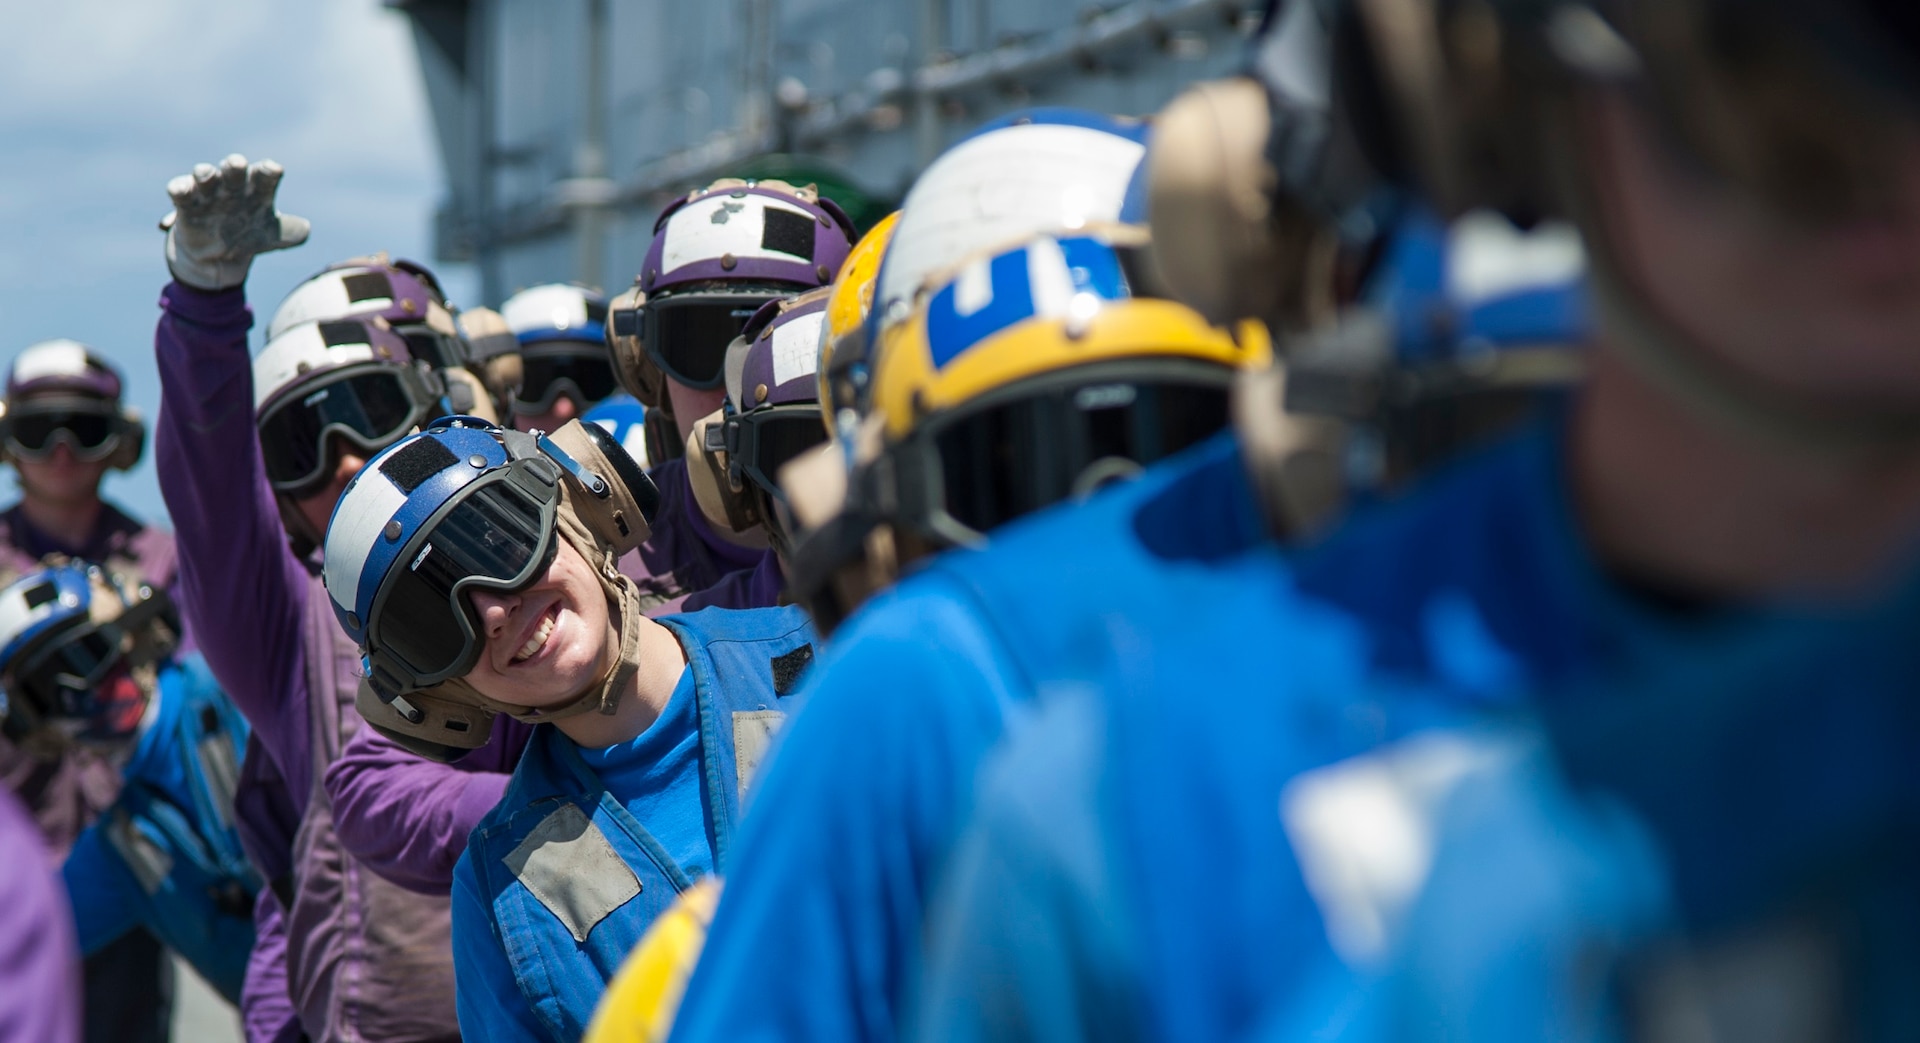 Sailors conduct aviation fire fighting drills on the flight deck aboard the amphibious assault ship USS Wasp (LHD 1) Dec. 20, 2017. Wasp is transiting to Sasebo, Japan to conduct a turnover with the USS Bonhomme Richard (LHD 6) as the forward-deployed flagship of the amphibious forces in the U.S. 7th Fleet area of operations.